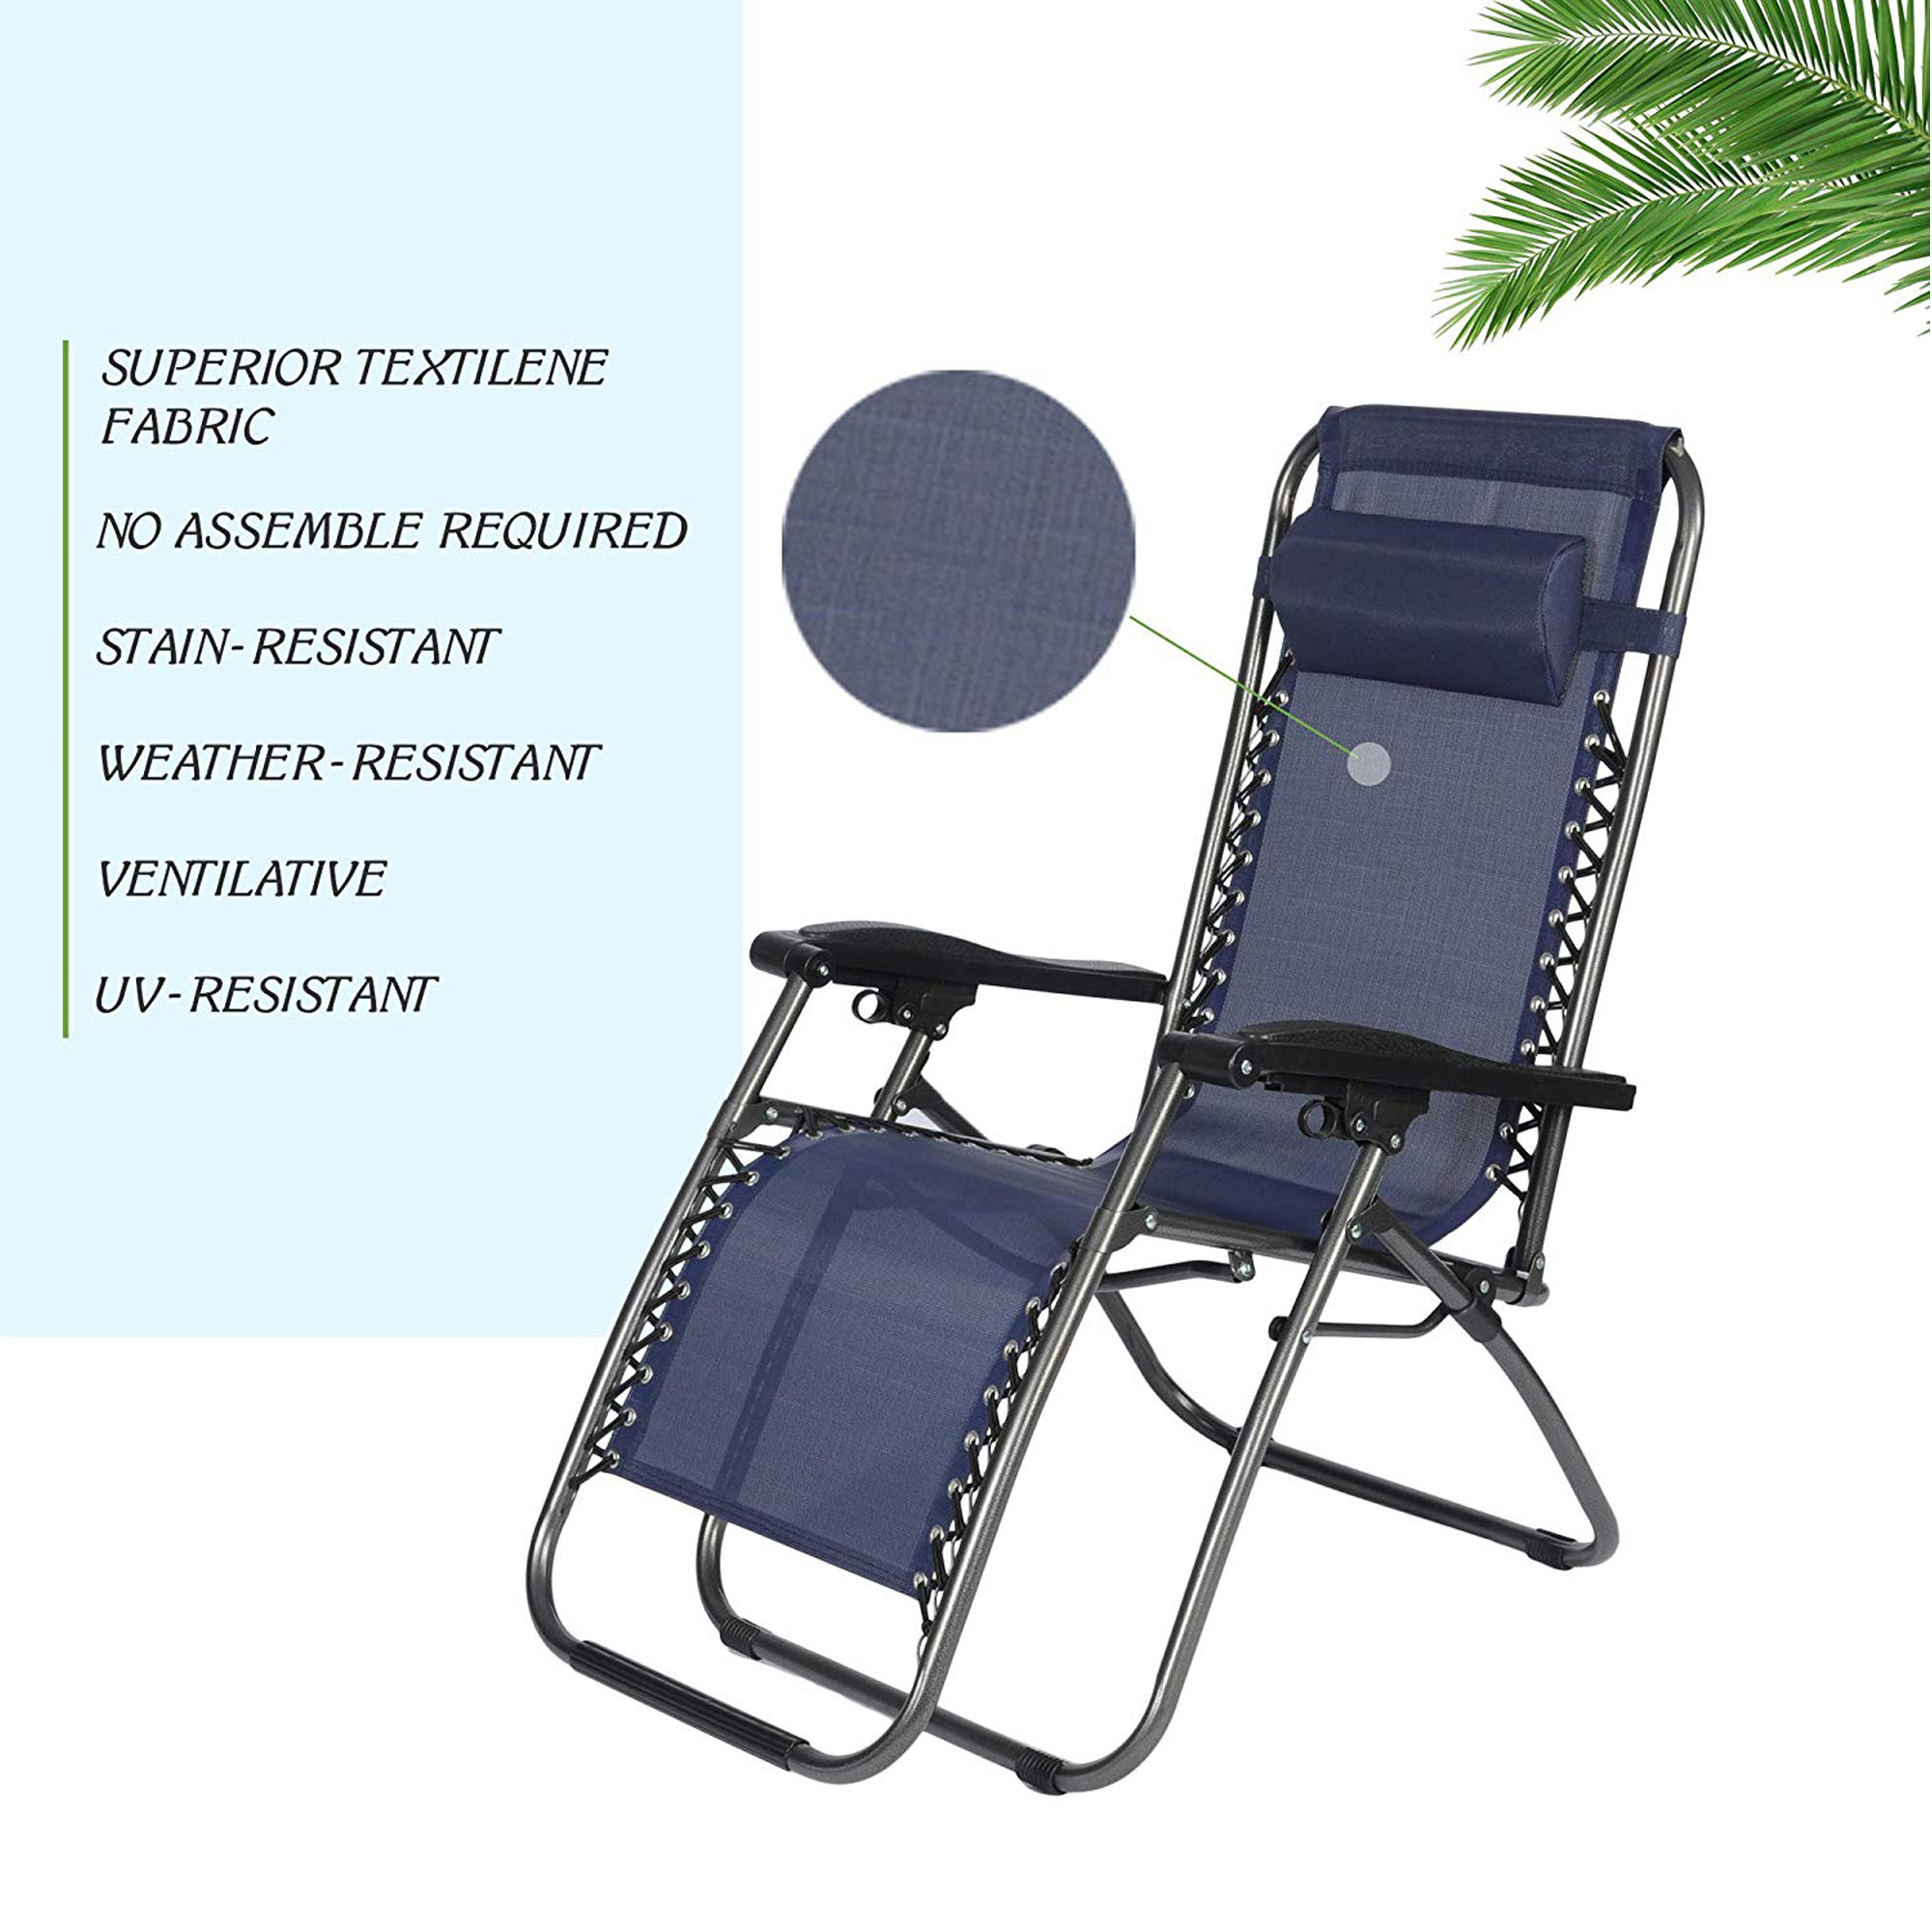 KARMAS PRODUCT Adjustable Zero Gravity Chair 2-pack Foldable Reclining Lounge Chair with Pillow for Beach Office Garden, Blue - image 2 of 7